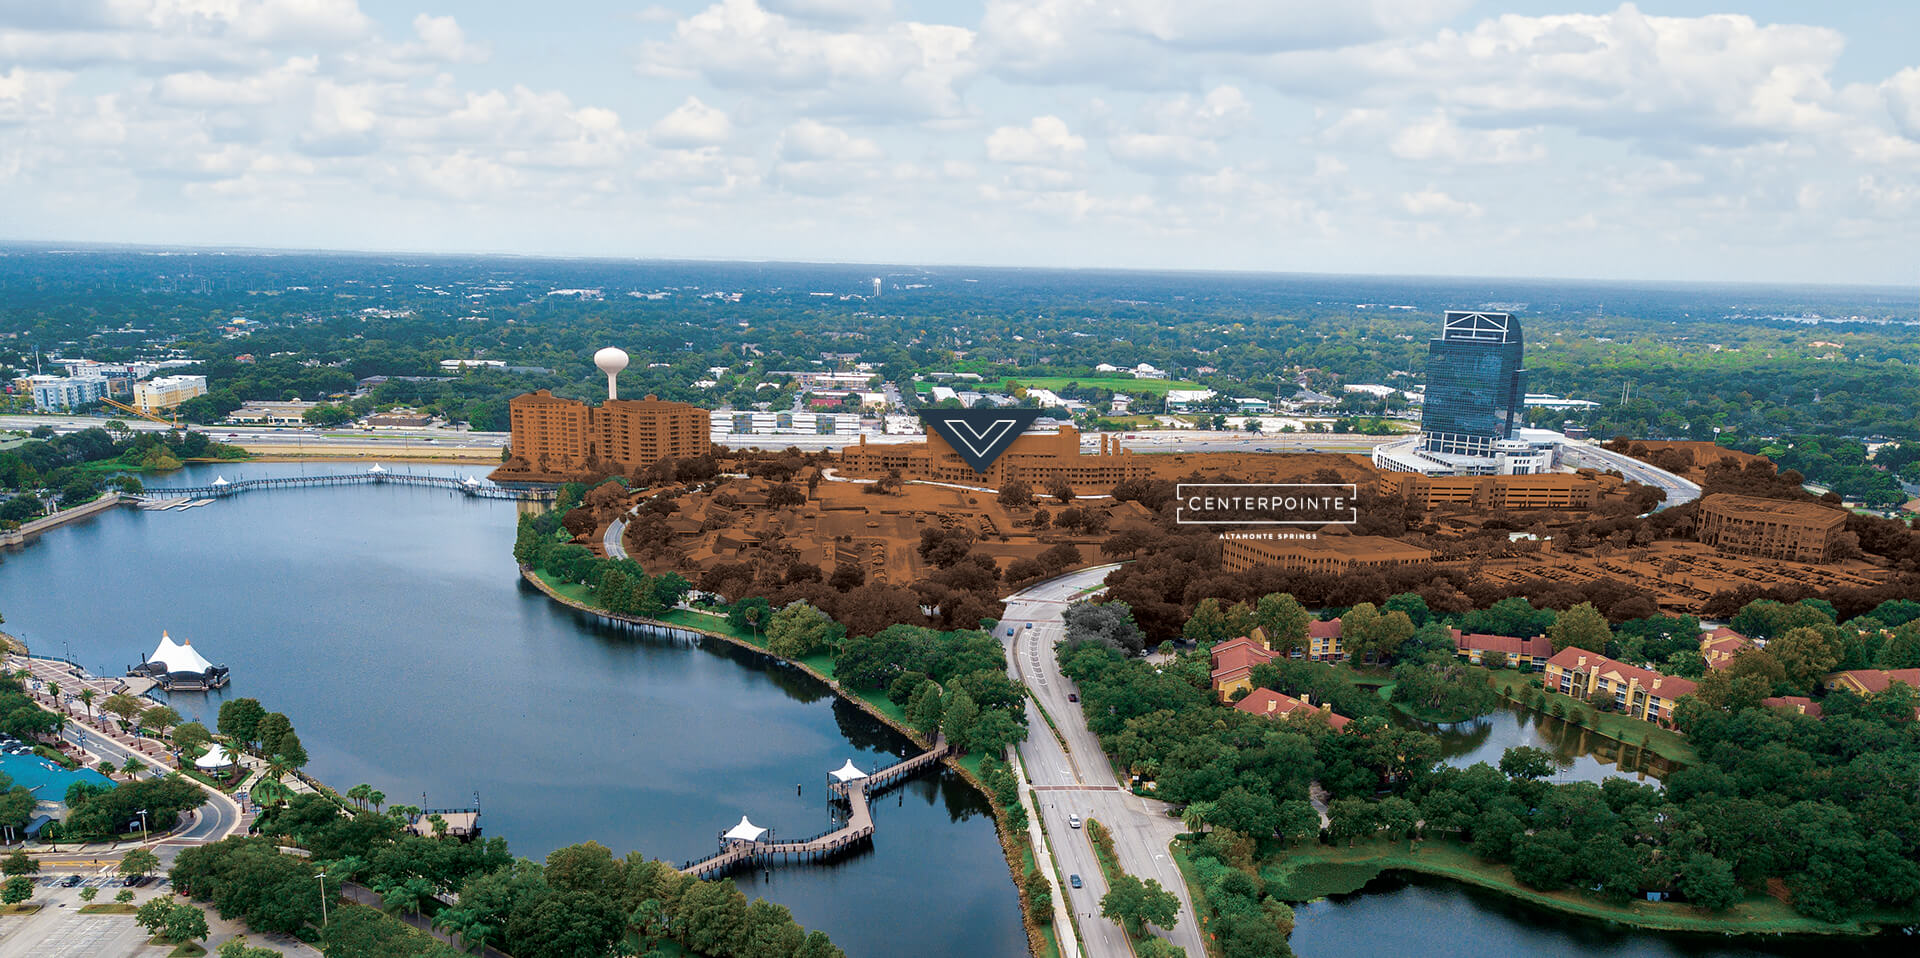 overview of Sanctuary at CenterPointe's location in Altamonte Springs